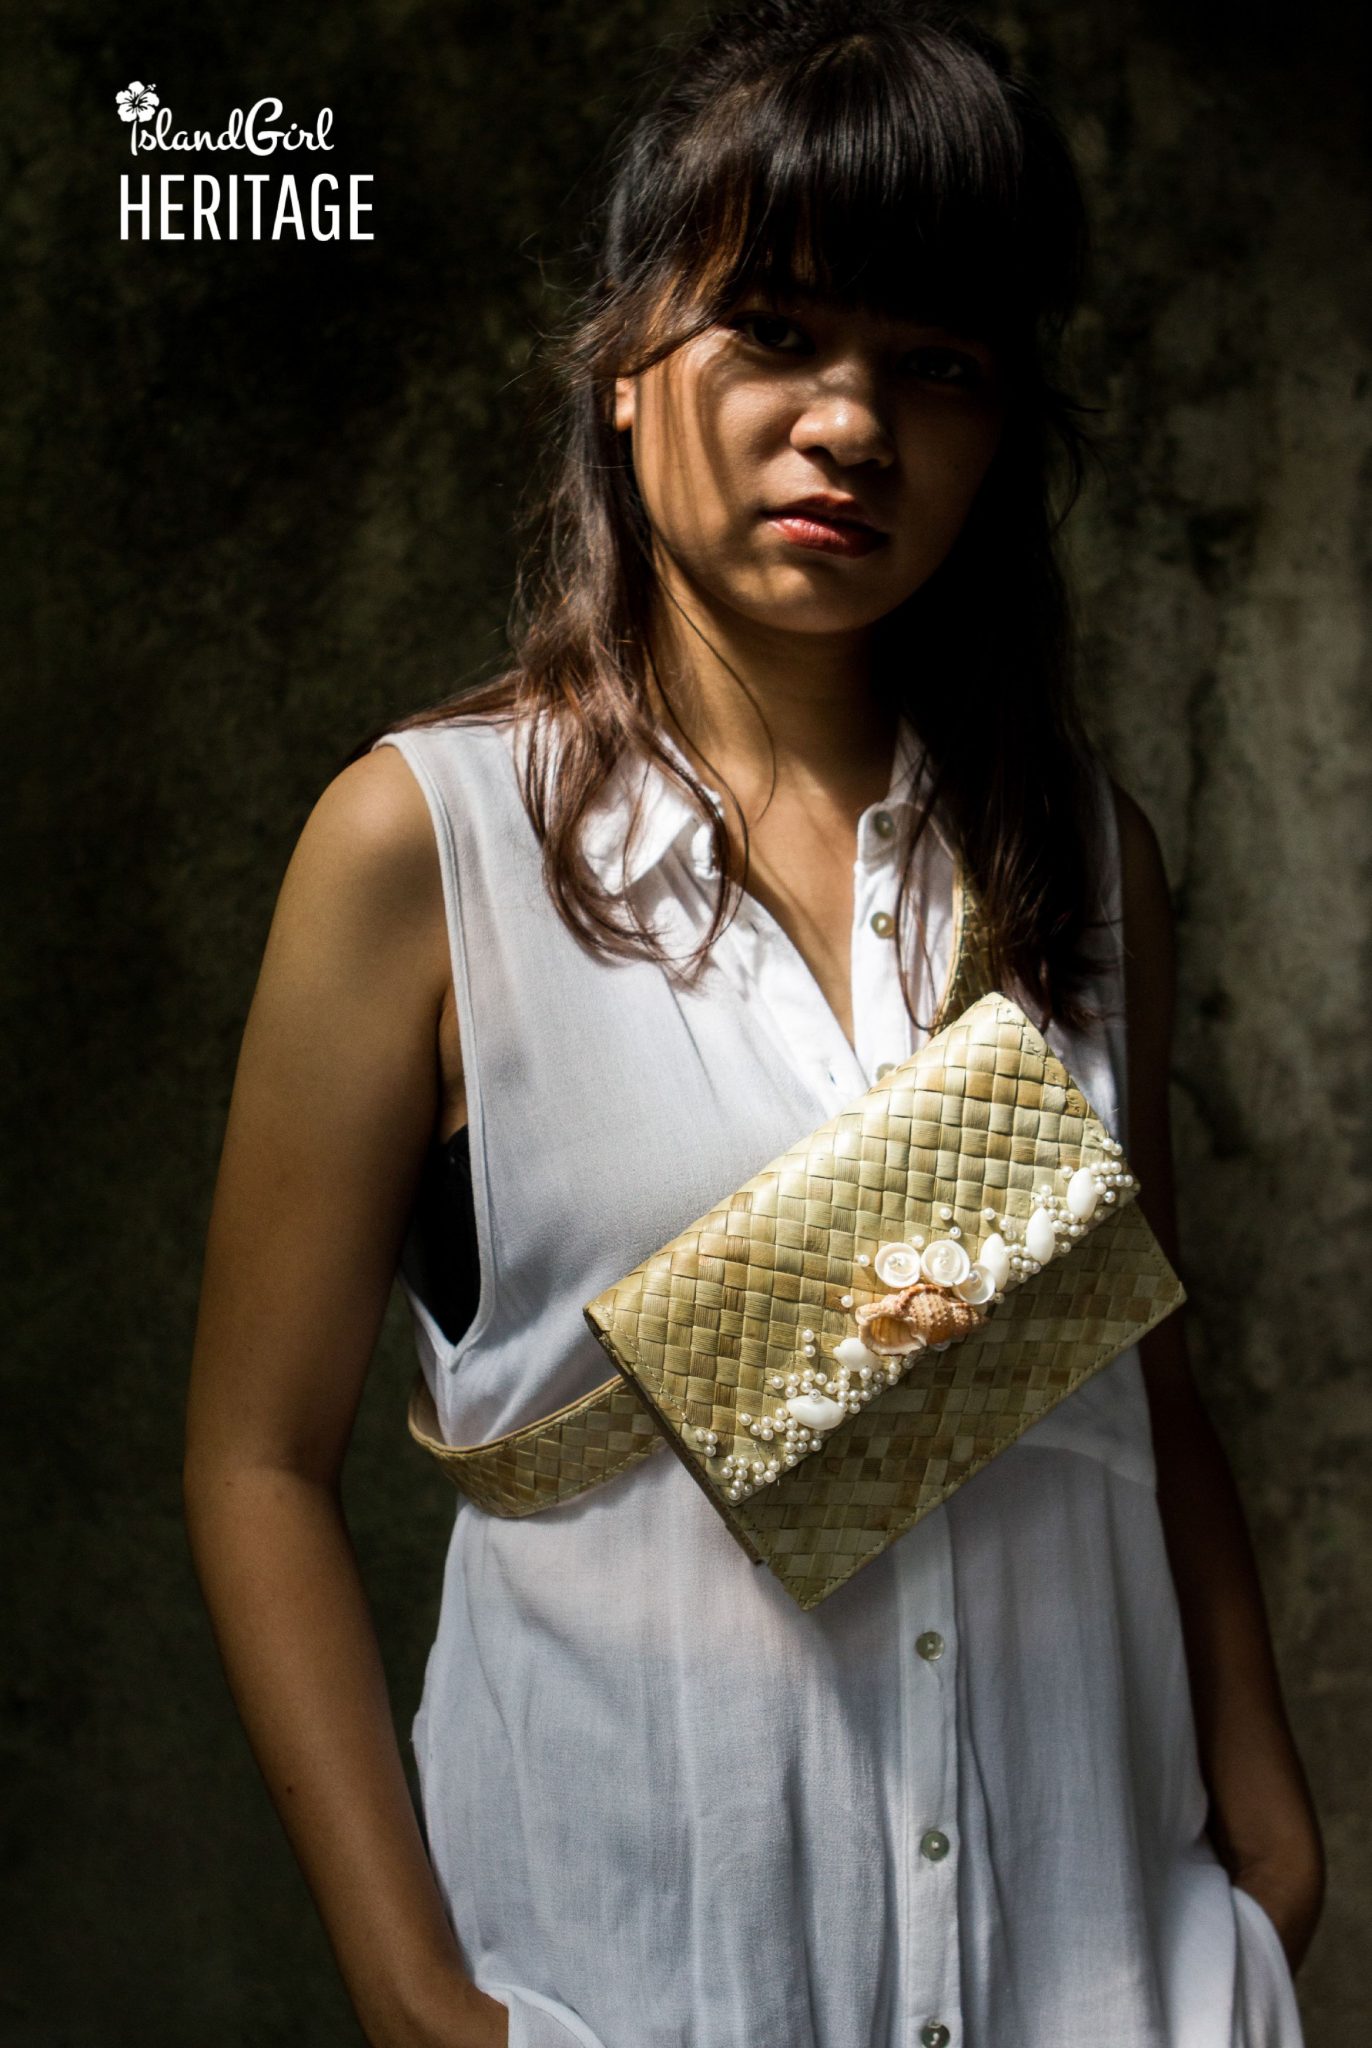 Image of a woman wearing a belt bag in white sleeveless shirt